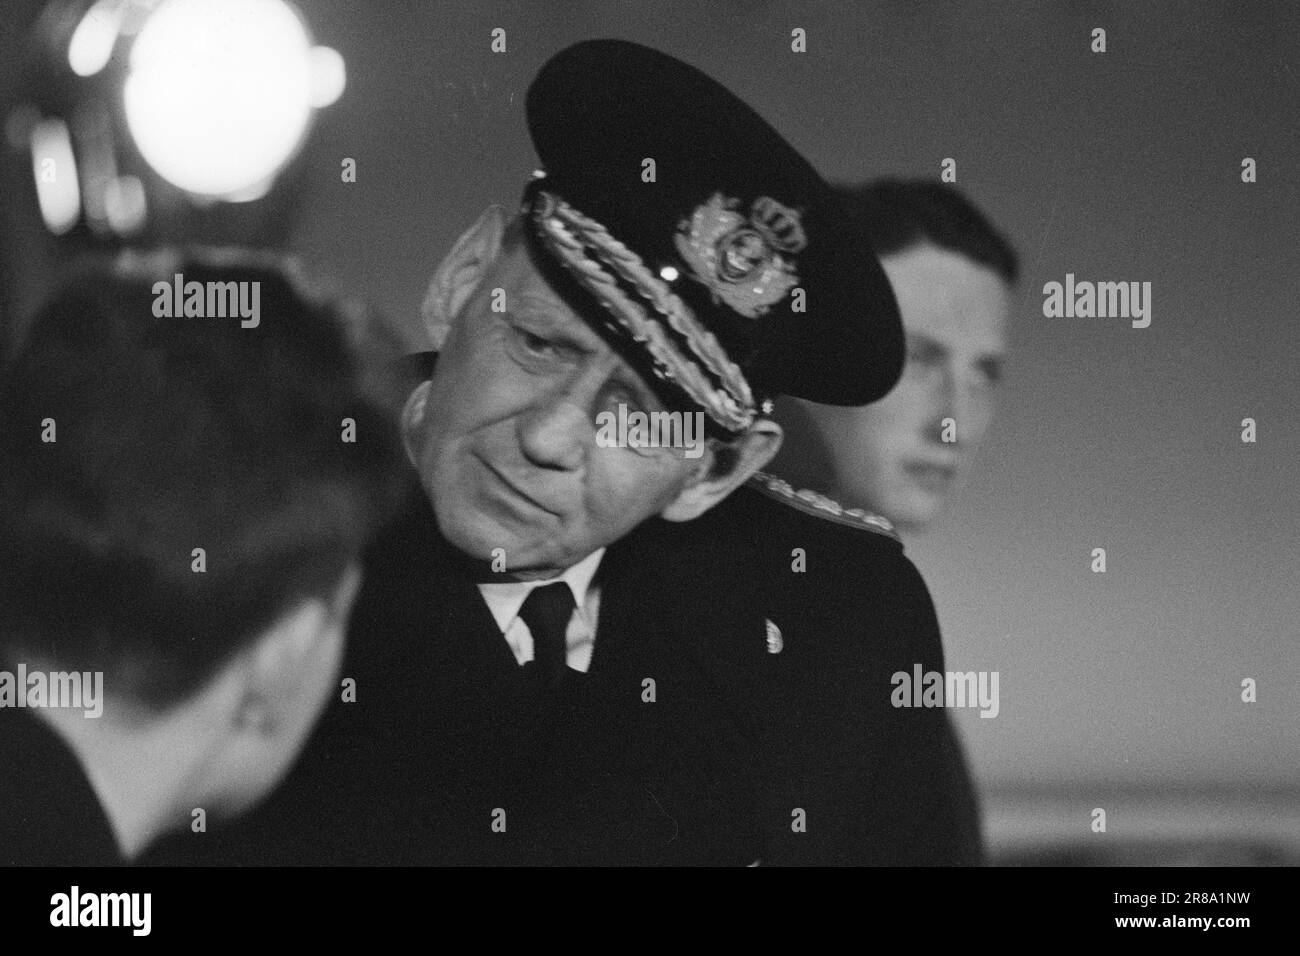 Current 9-3-1960 : Royal Danish charm Norway has had an official royal visit from Denmark, three cold and sour February days to end. The sea-savvy monarch was keenly interested in the Kon-Tiki fleet and had many questions to ask.  Photo: Ivar Aaserud / Sverre A. Børretzen / Aktuell / NTB ***PHOTO NOT IMAGE PROCESSED*** Stock Photo